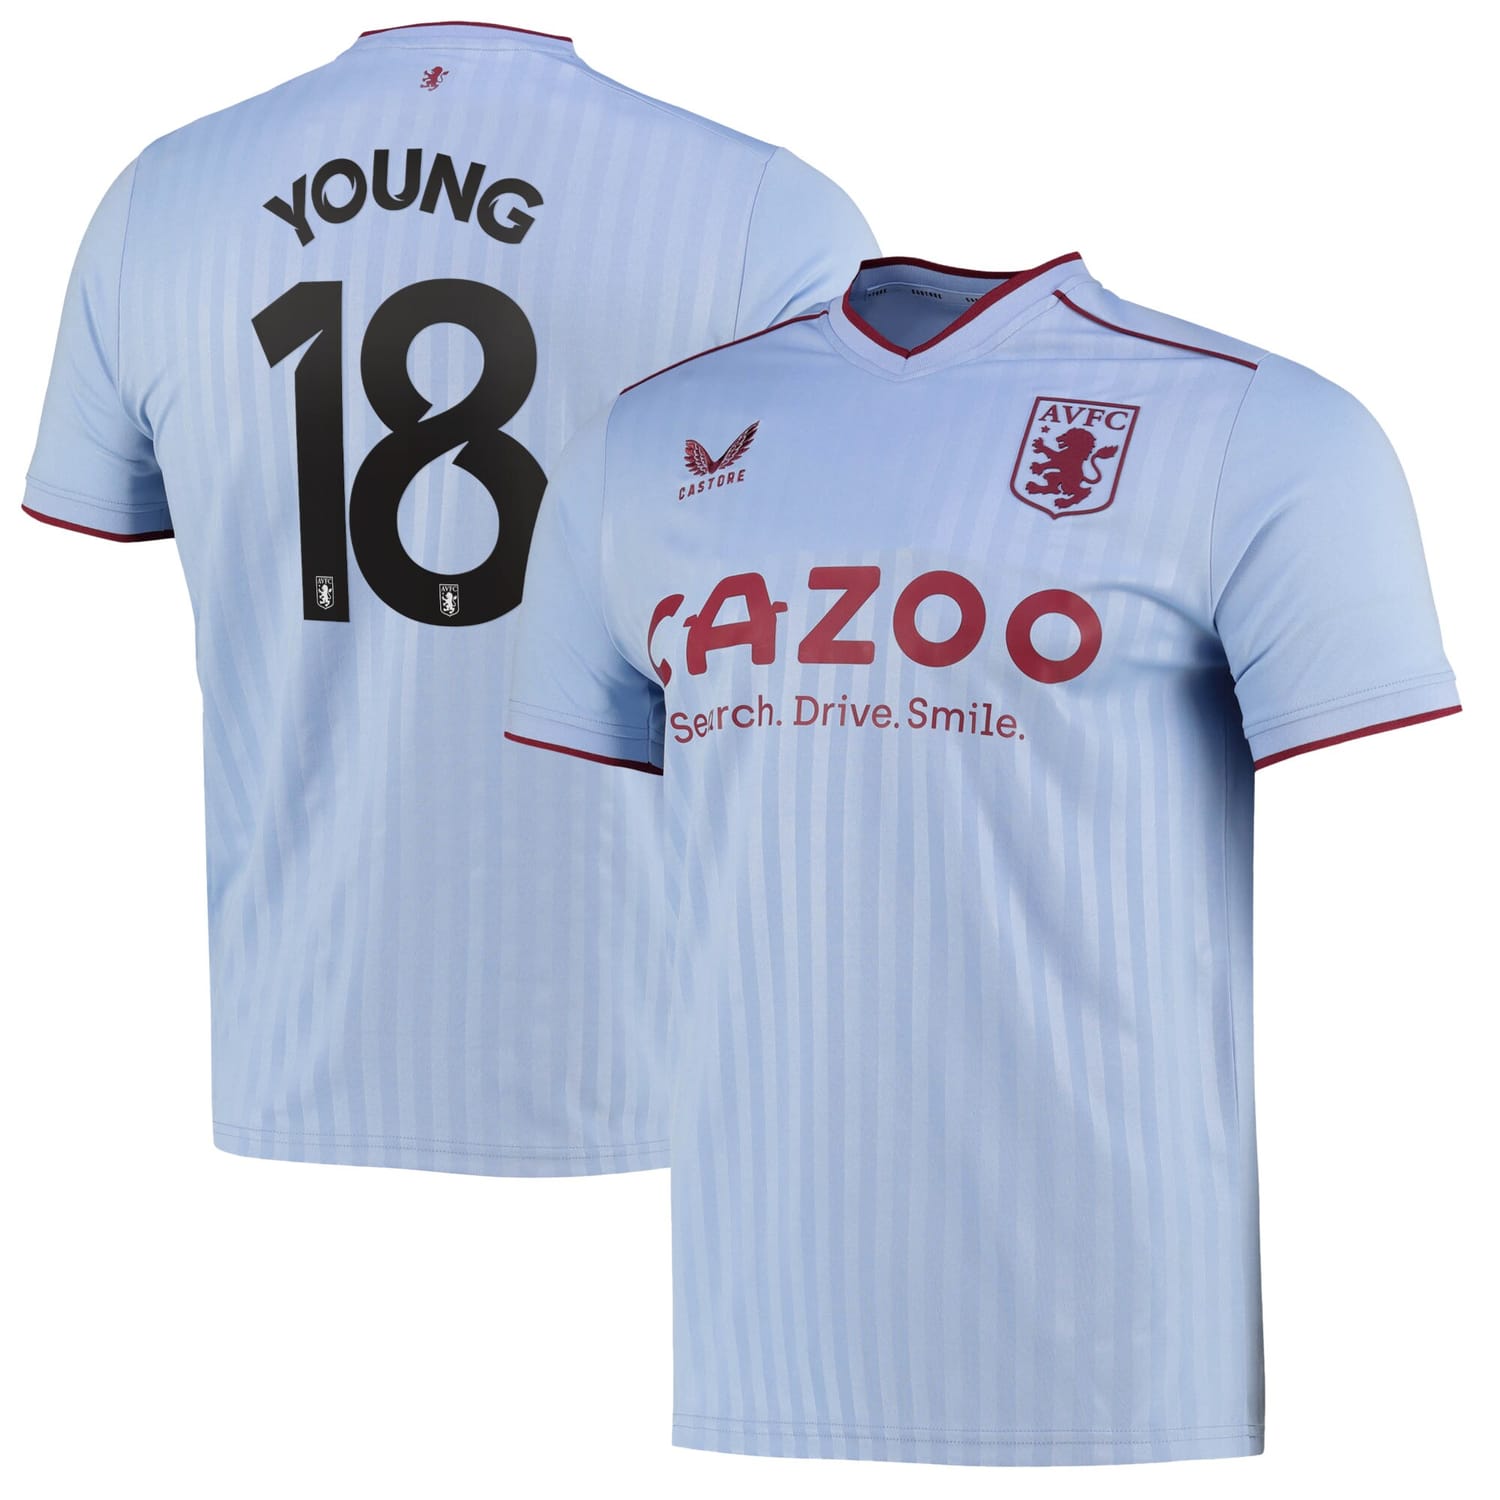 Premier League Aston Villa Away Cup Jersey Shirt 2022-23 player Ashley Young 18 printing for Men